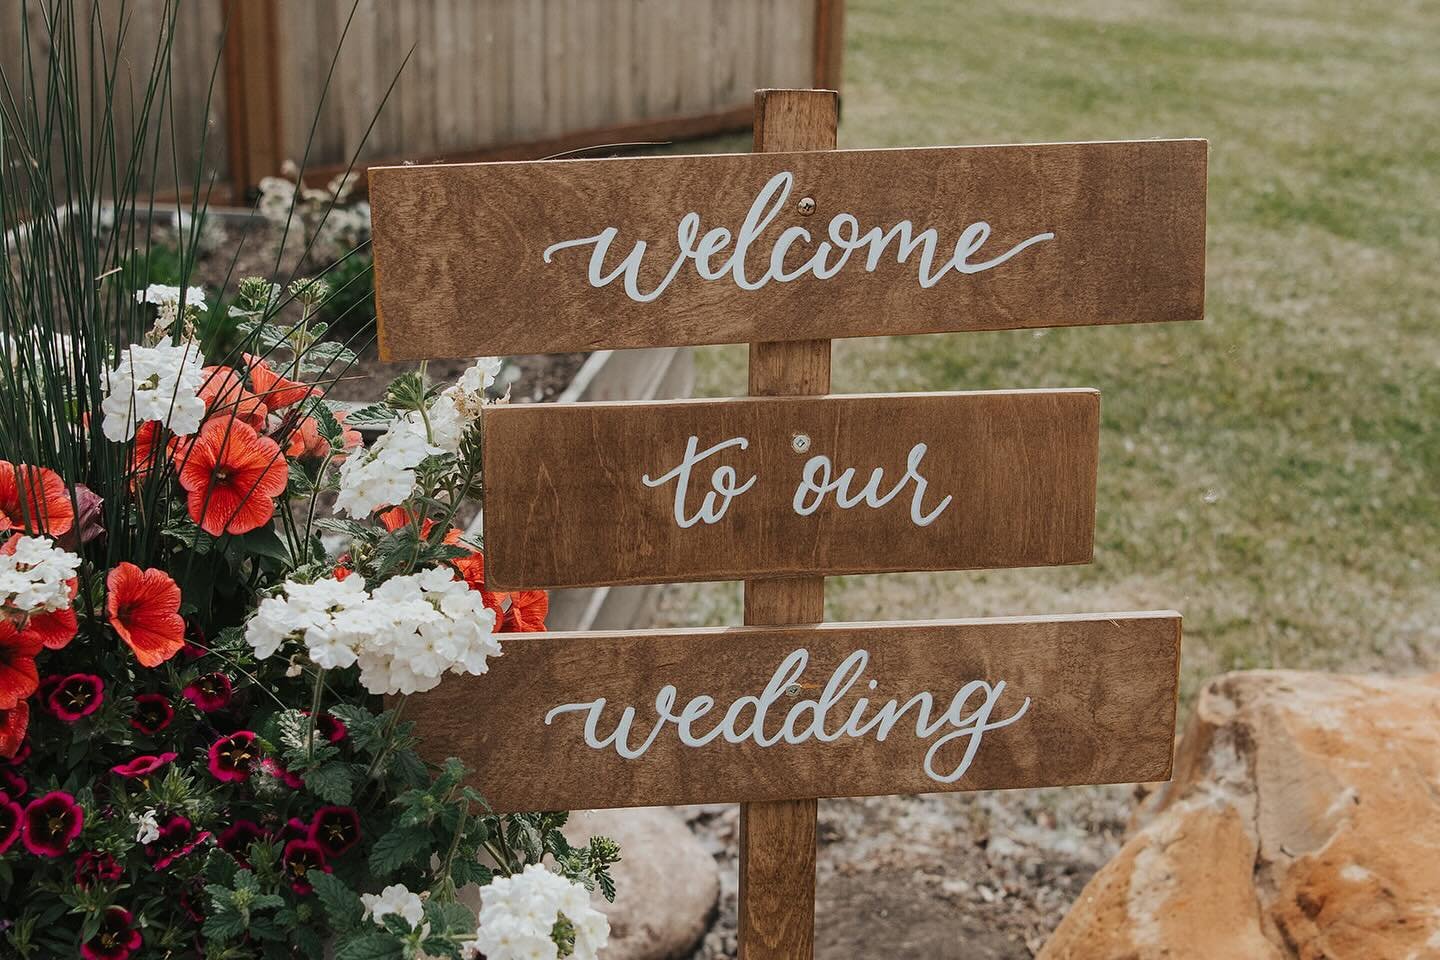 Wedding trends are always coming and going, and sometimes it&rsquo;s hard to keep up. Sometimes they go out of style just as fast as they came in, especially if they are used or have been used a million times over. BUTTTT that doesn&rsquo;t mean they